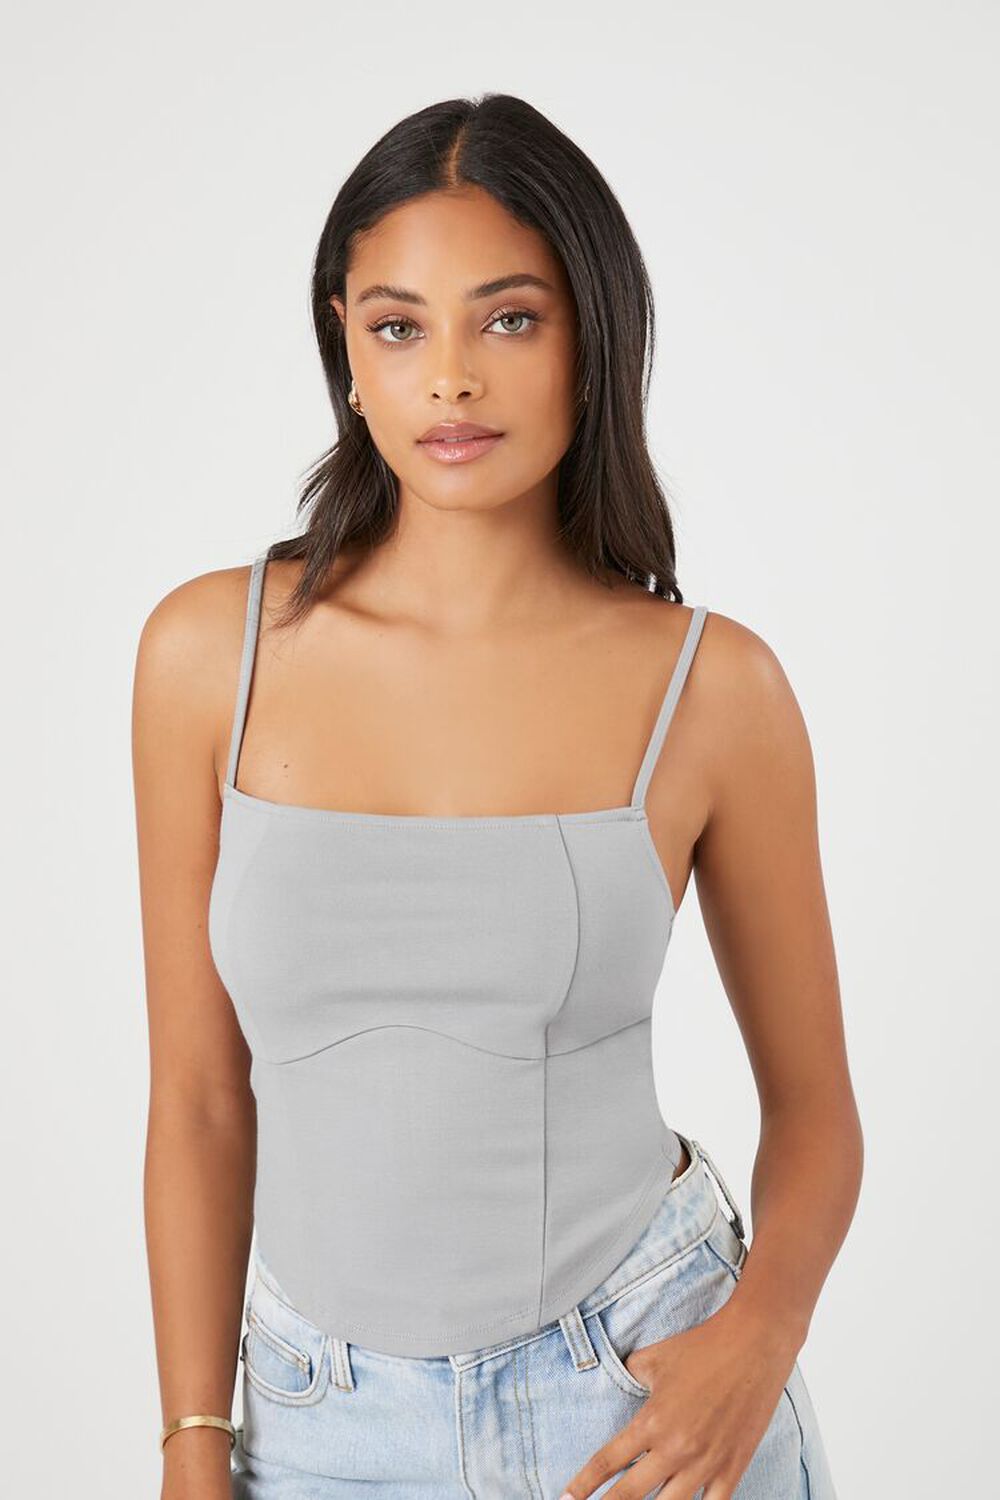 Forever 21 Women's Satin Bustier Cropped Cami in Blue Moon Medium